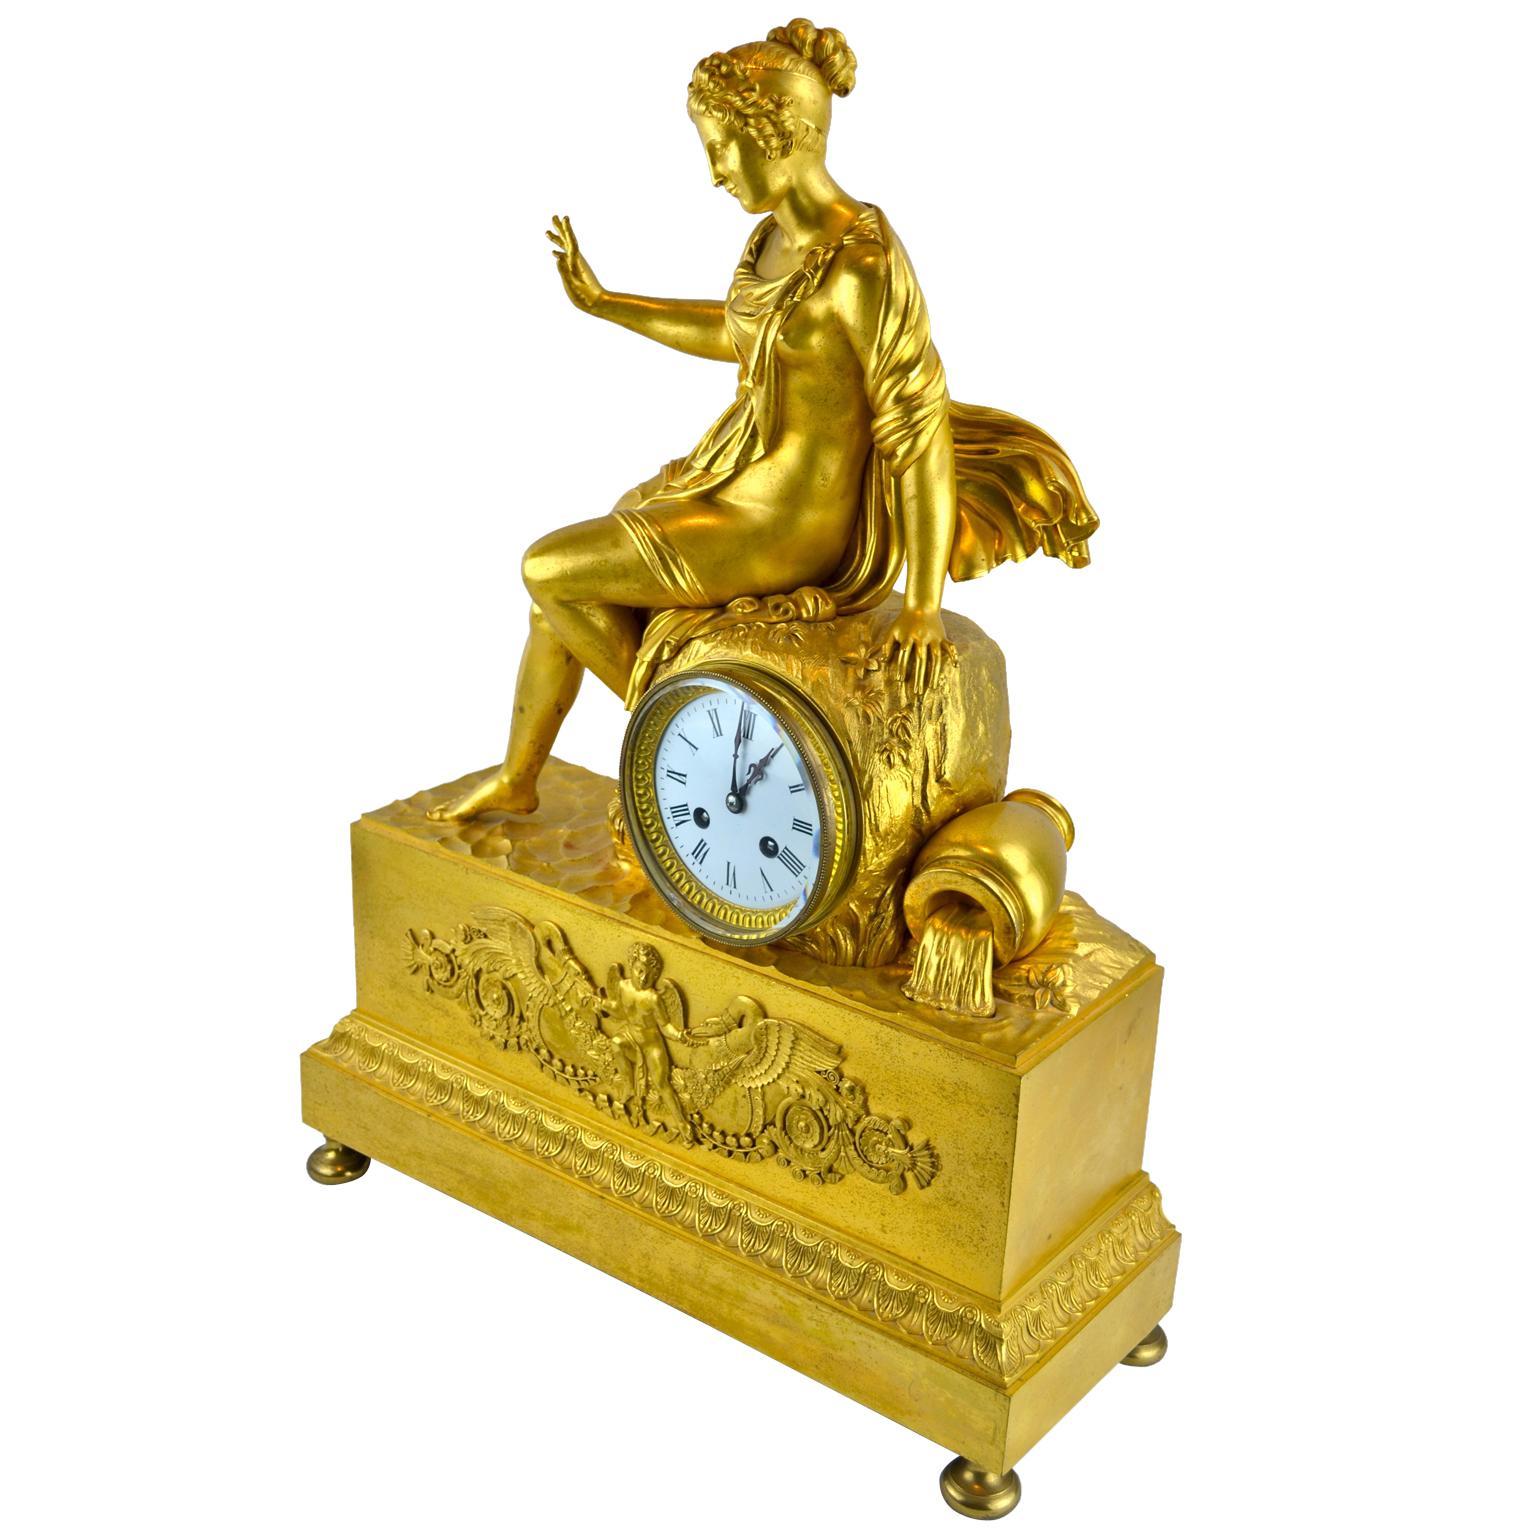 Allegorical French Empire Gilt Bronze Clock Depicting Earth’s Source of Water For Sale 1